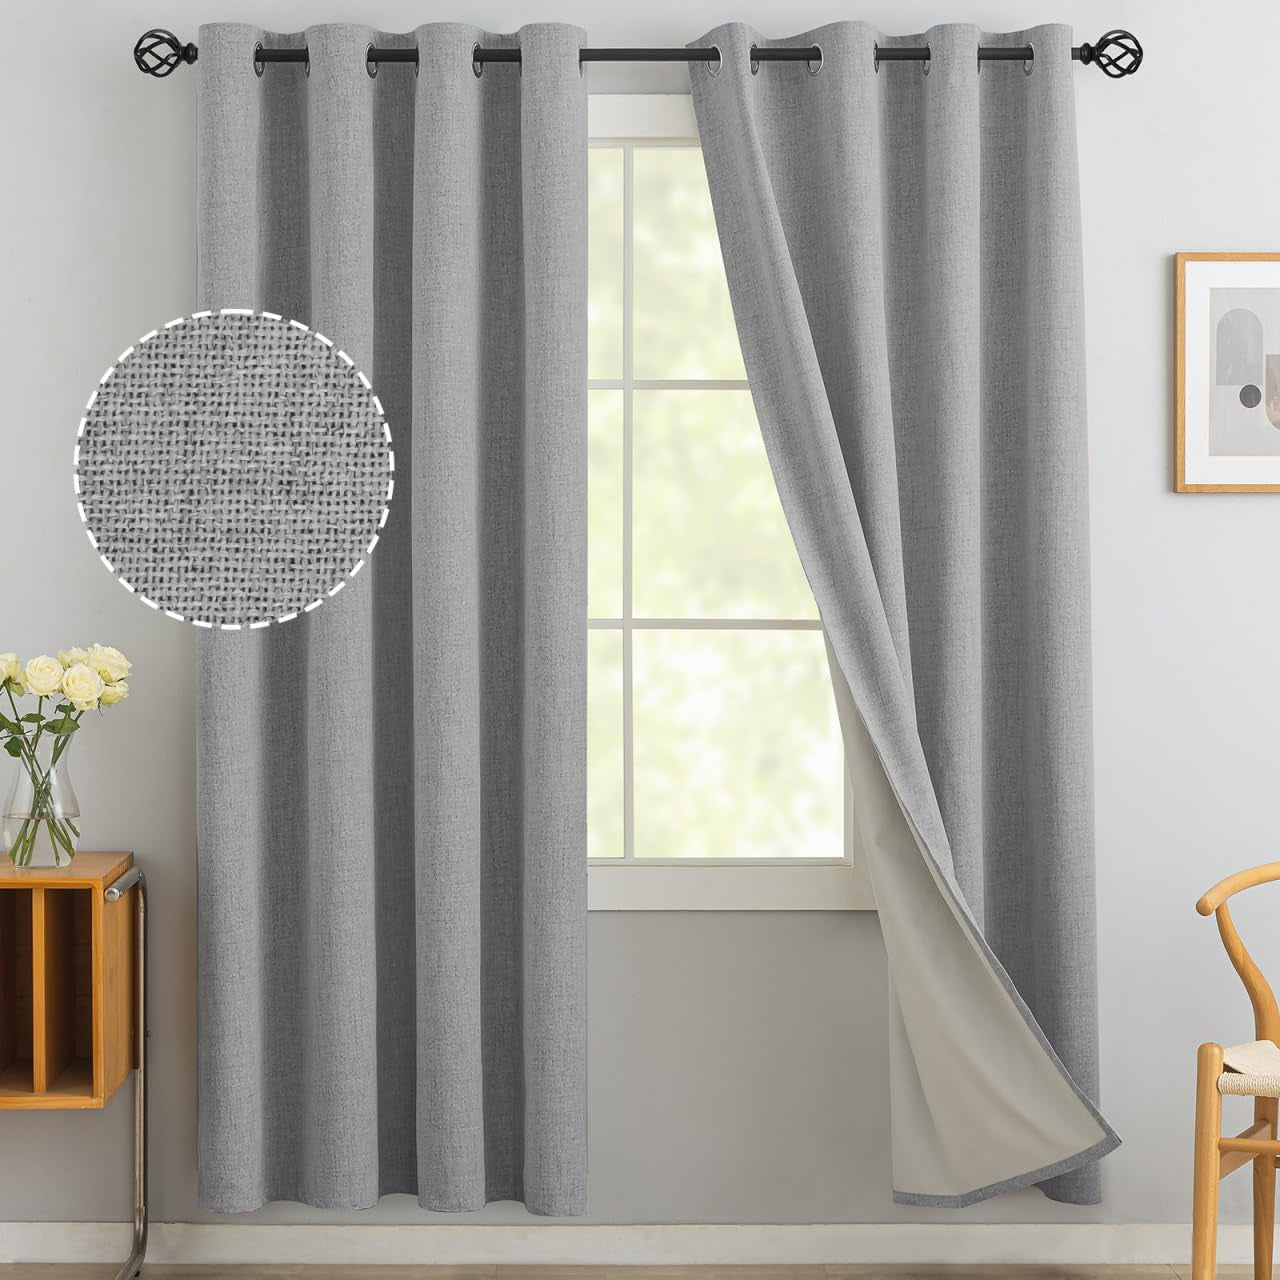 Yakamok Natural Linen Curtains 100% Blackout 84 Inches Long,Room Darkening Textured Curtains for Living Room Thermal Grommet Bedroom Curtains 2 Panels with Greyish White Liner  Yakamok Dove Grey 52W X 72L / 2 Panels 